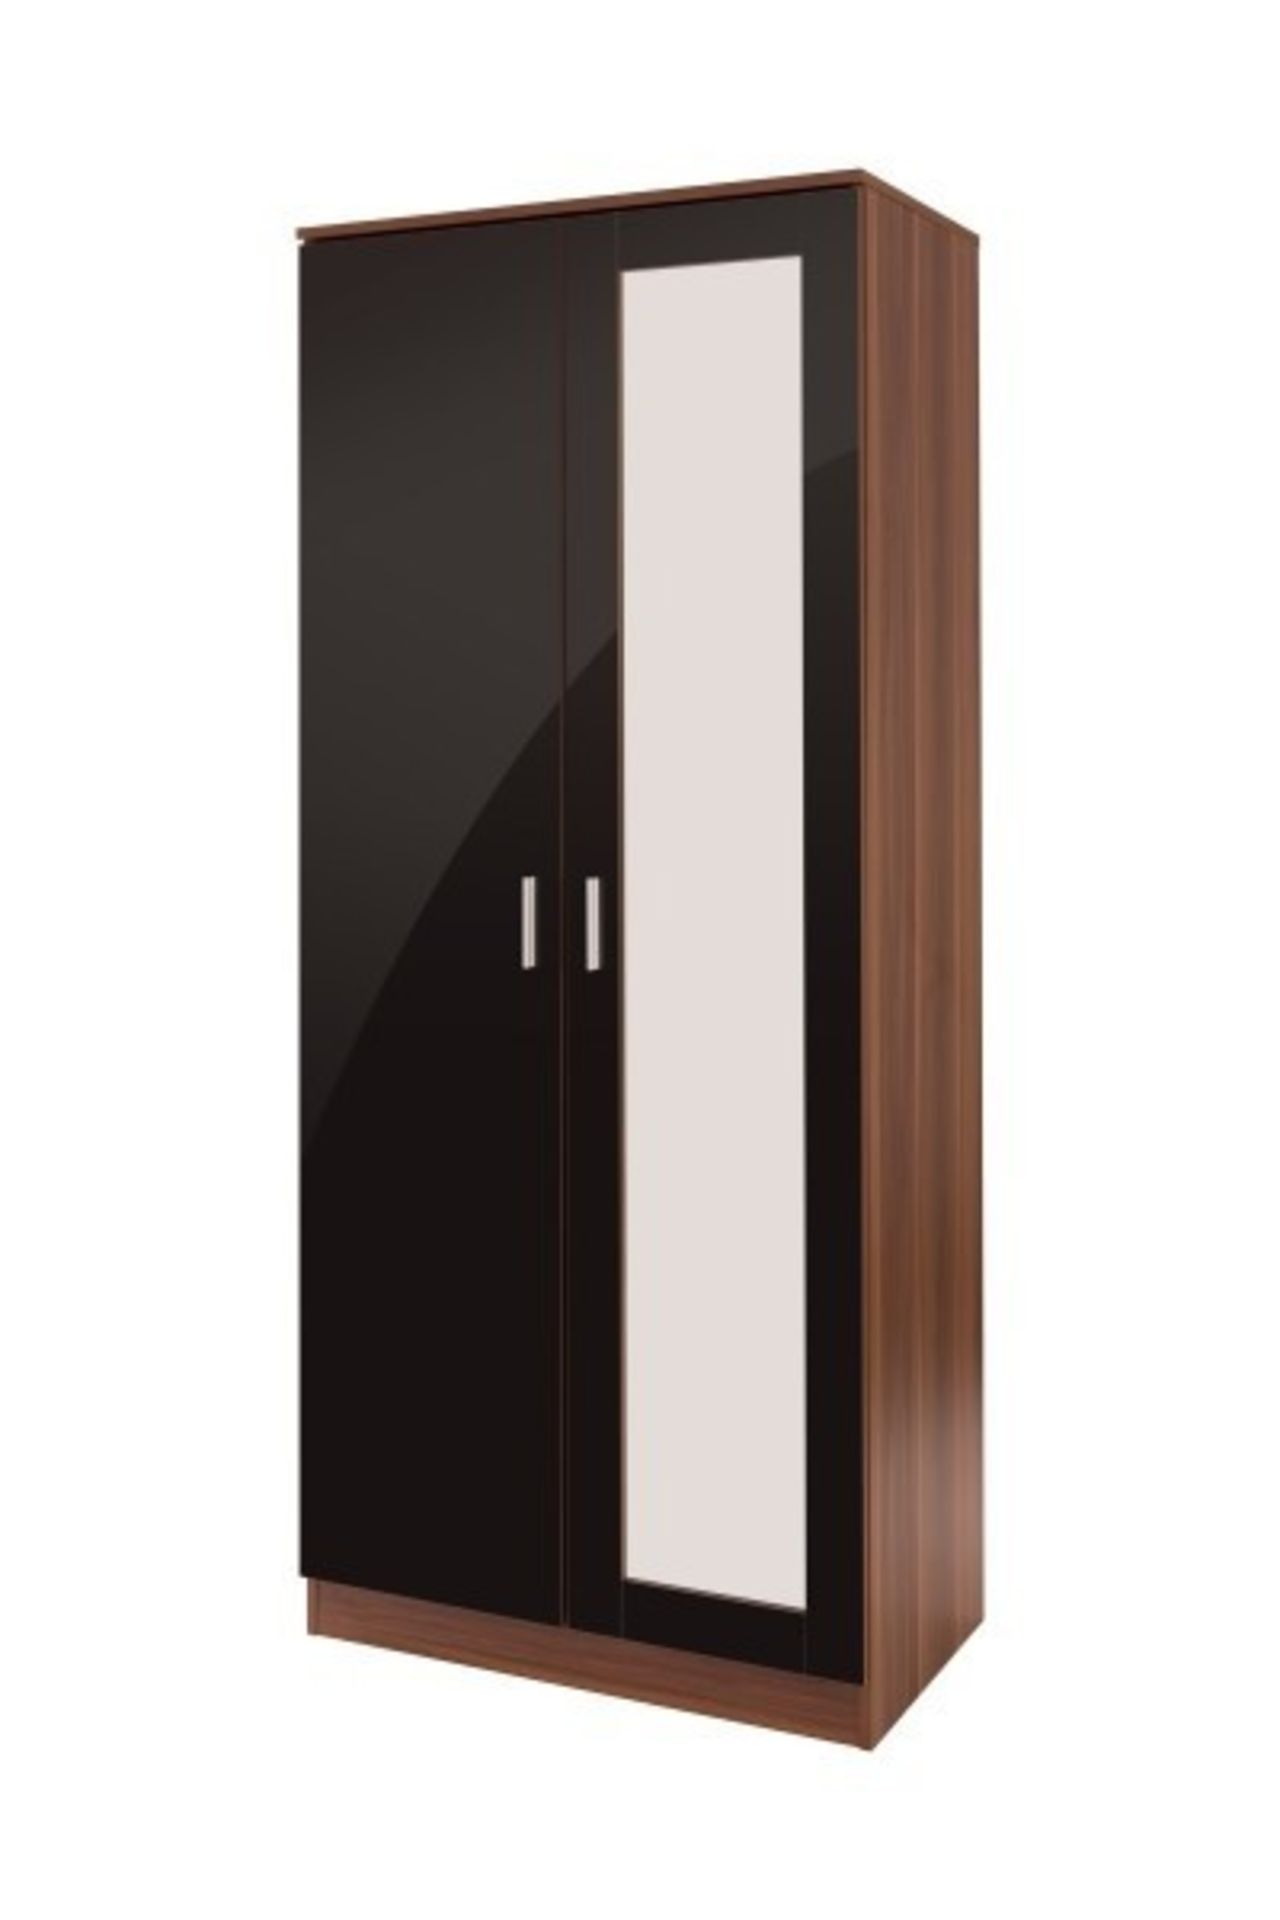 1 BOXED OTTOWA 2 DOOR WARDROBE WITH MIRROR IN BLACK WALNUT (PUBLIC VIEWING AVAILABLE)